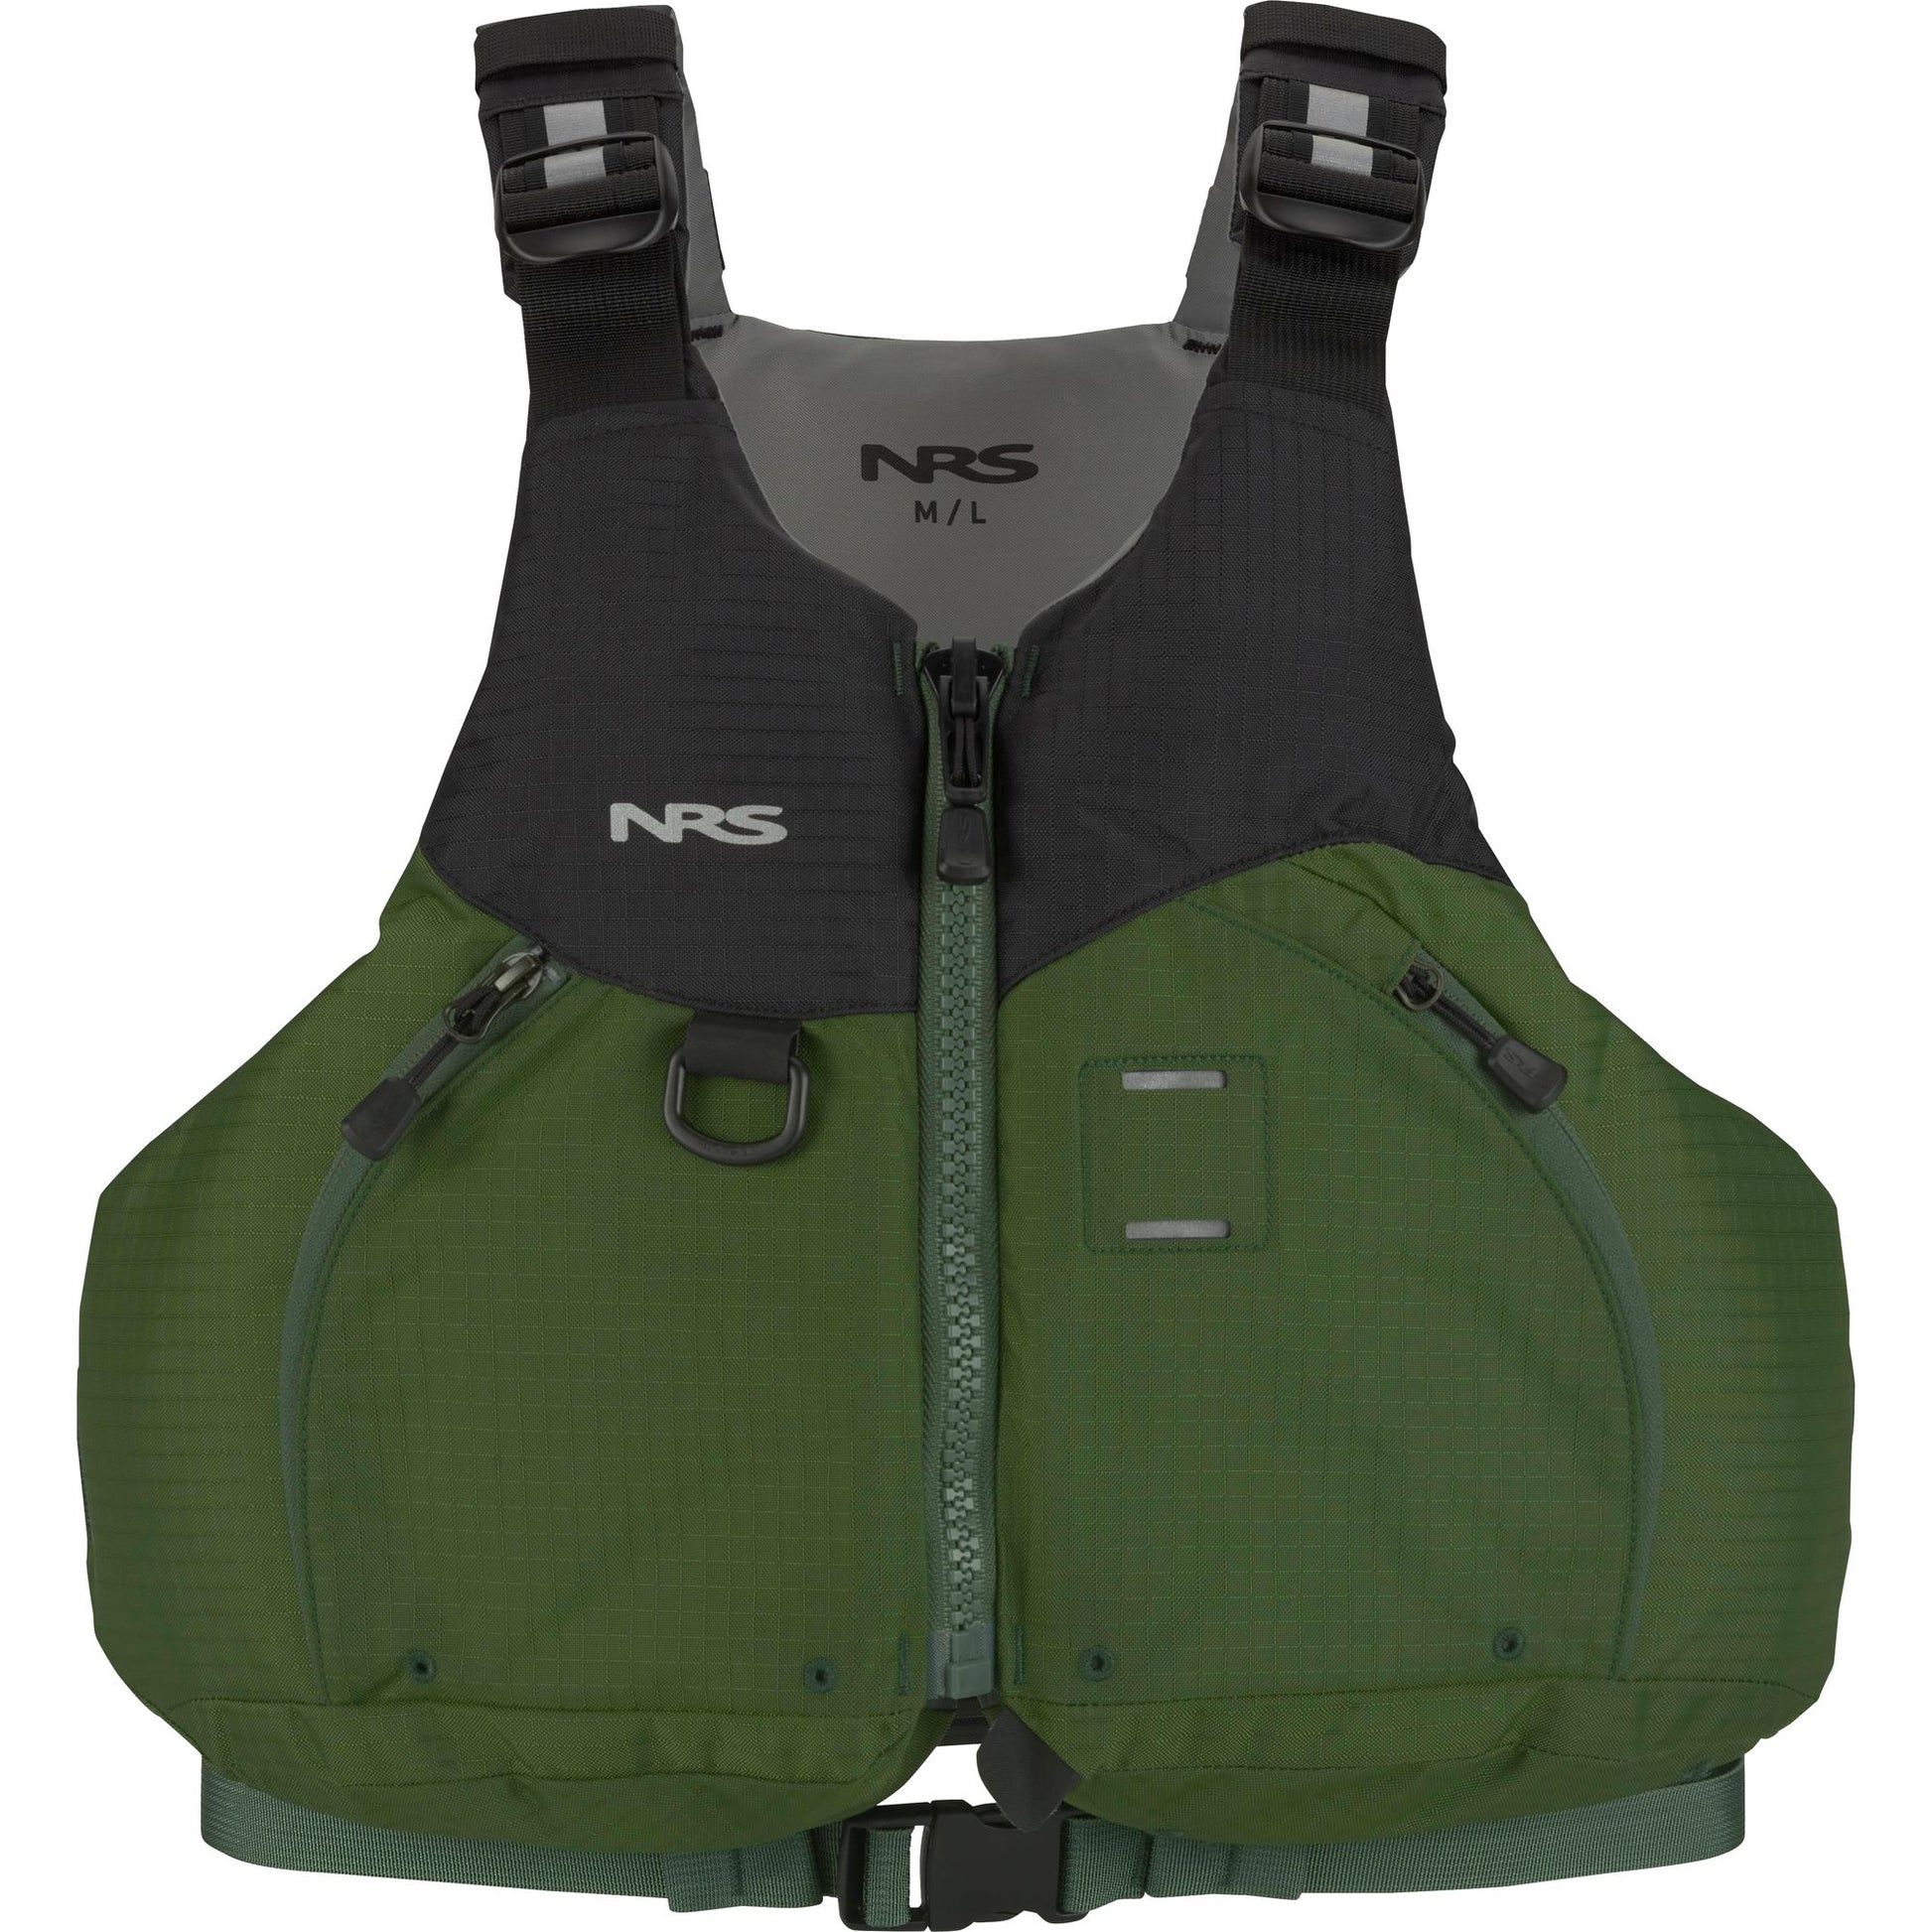 The NRS men's Ambient PFD is green and black.